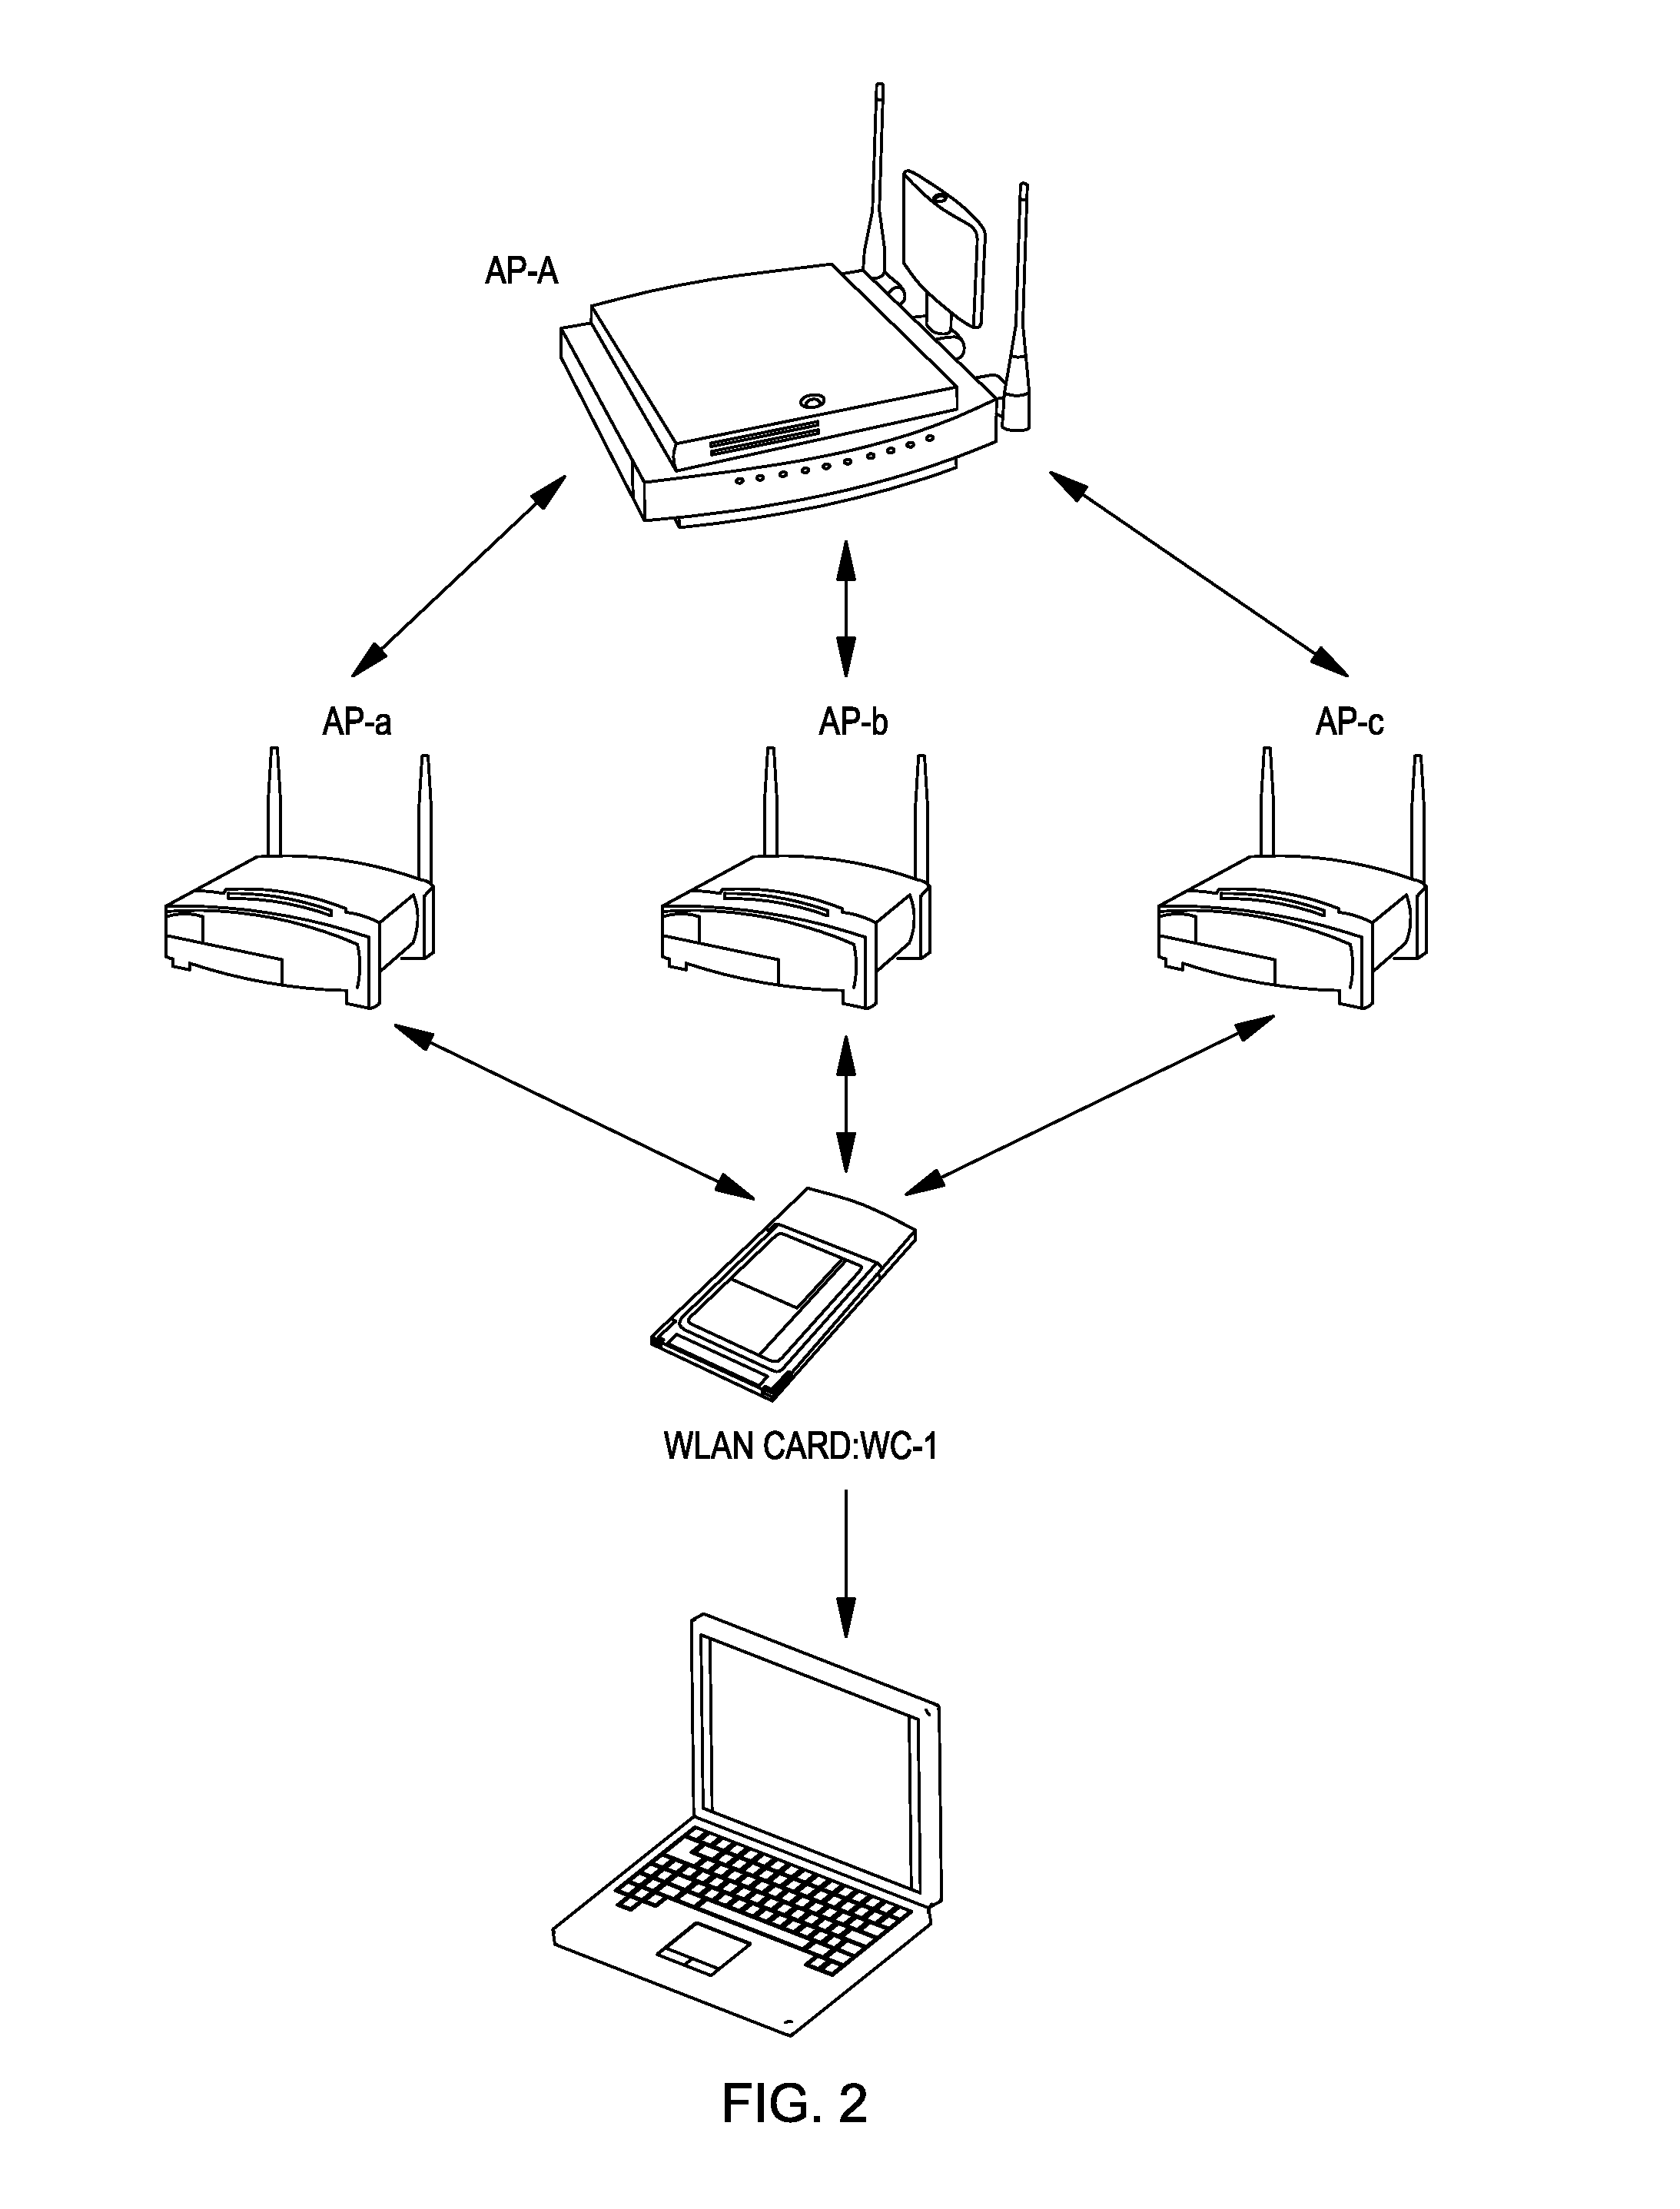 Handing off a terminal among wireless access points